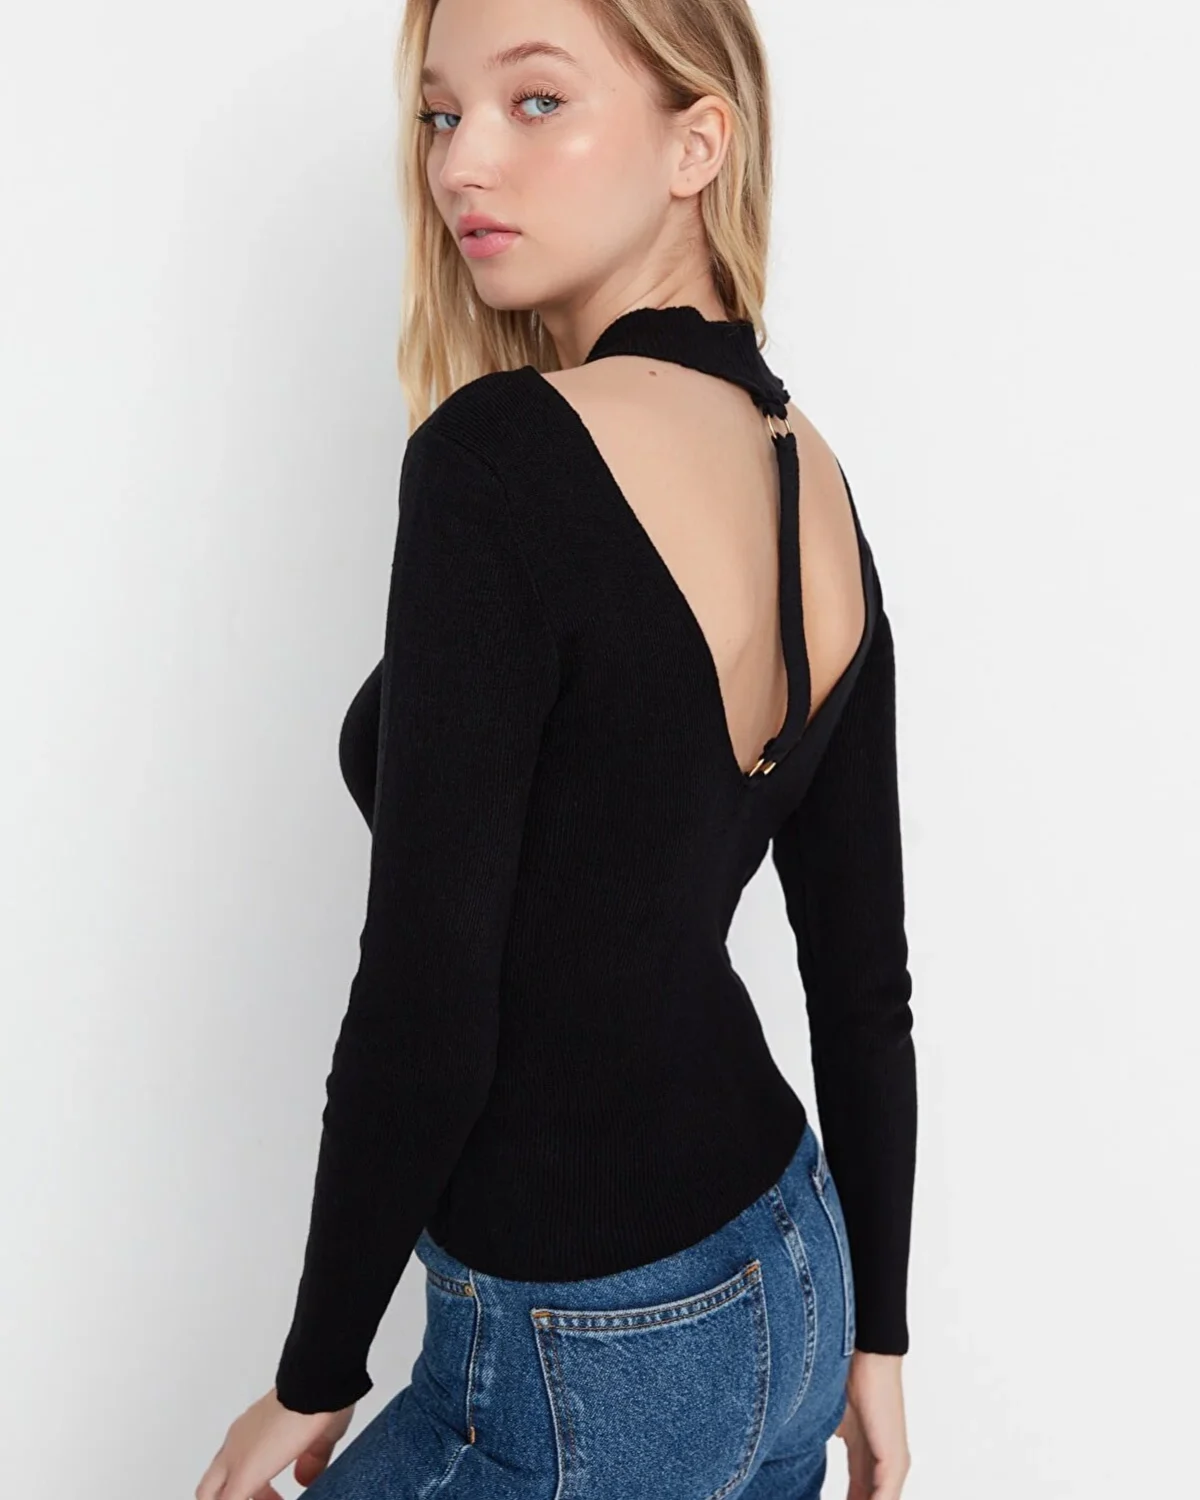 Trendyol Collection Blouse by Picks for Less